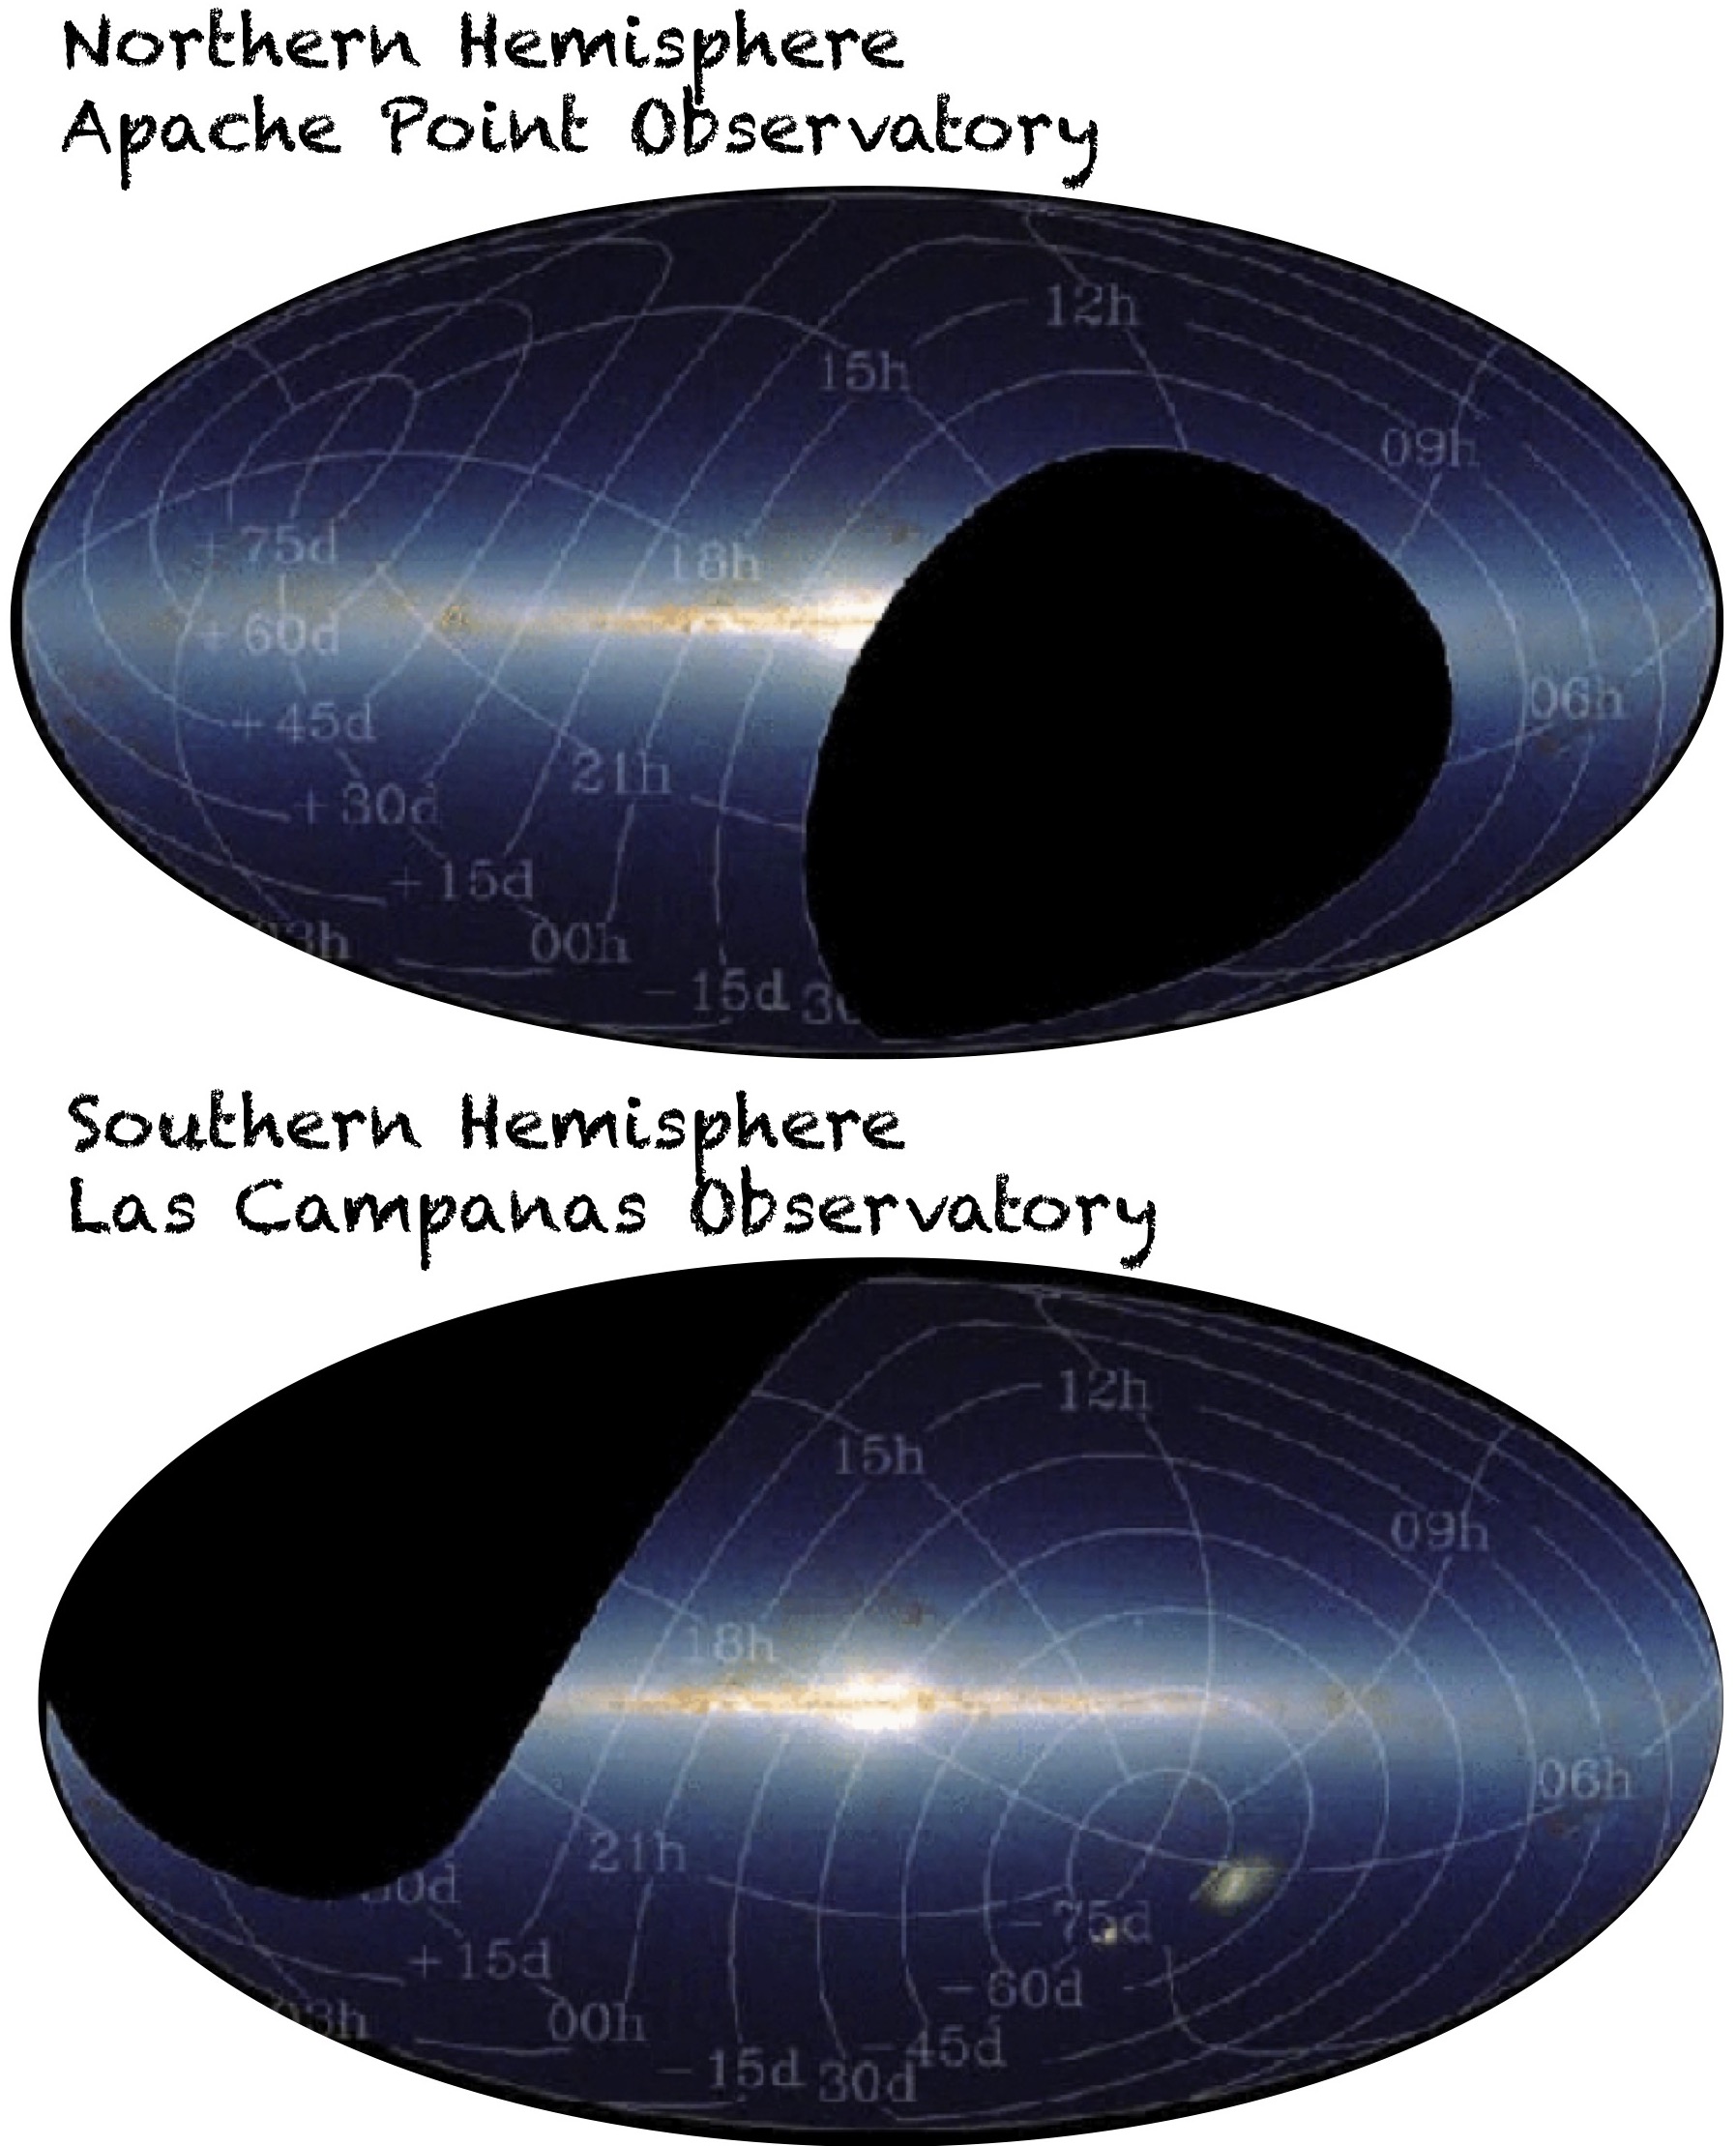  These images show what parts of the Milky Way are visible from the Northern (top) and Southern (bottom) hemispheres. These diagrams are optimized for Apache Point Observatory and Las Campanas Observatory. <i>Image courtesy of P. Frinchaboy.</i>
